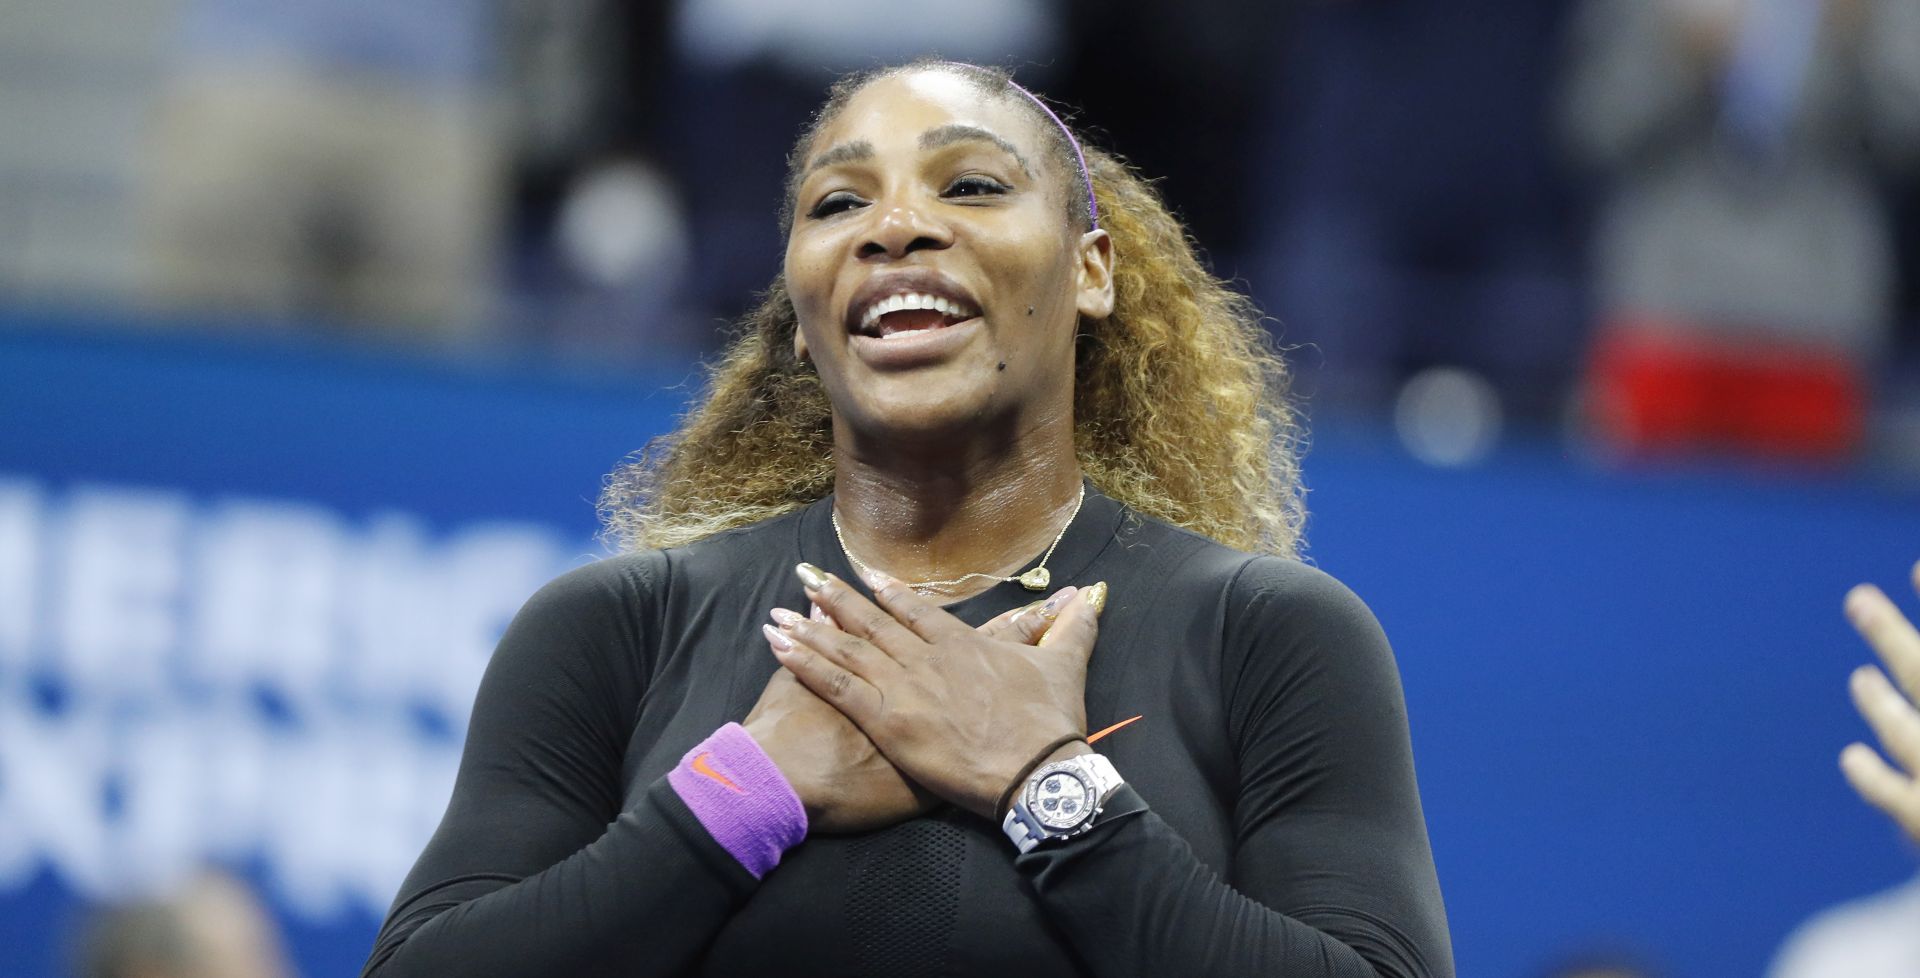 epa07821343 Serena Williams of the US reacts after defeating Elina Svitolina of Ukraine during their Semi-Finals round match on the eleventh day of the US Open Tennis Championships the USTA National Tennis Center in Flushing Meadows, New York, USA, 05 September 2019. The US Open runs from 26 August through 08 September.  EPA/JUSTIN LANE